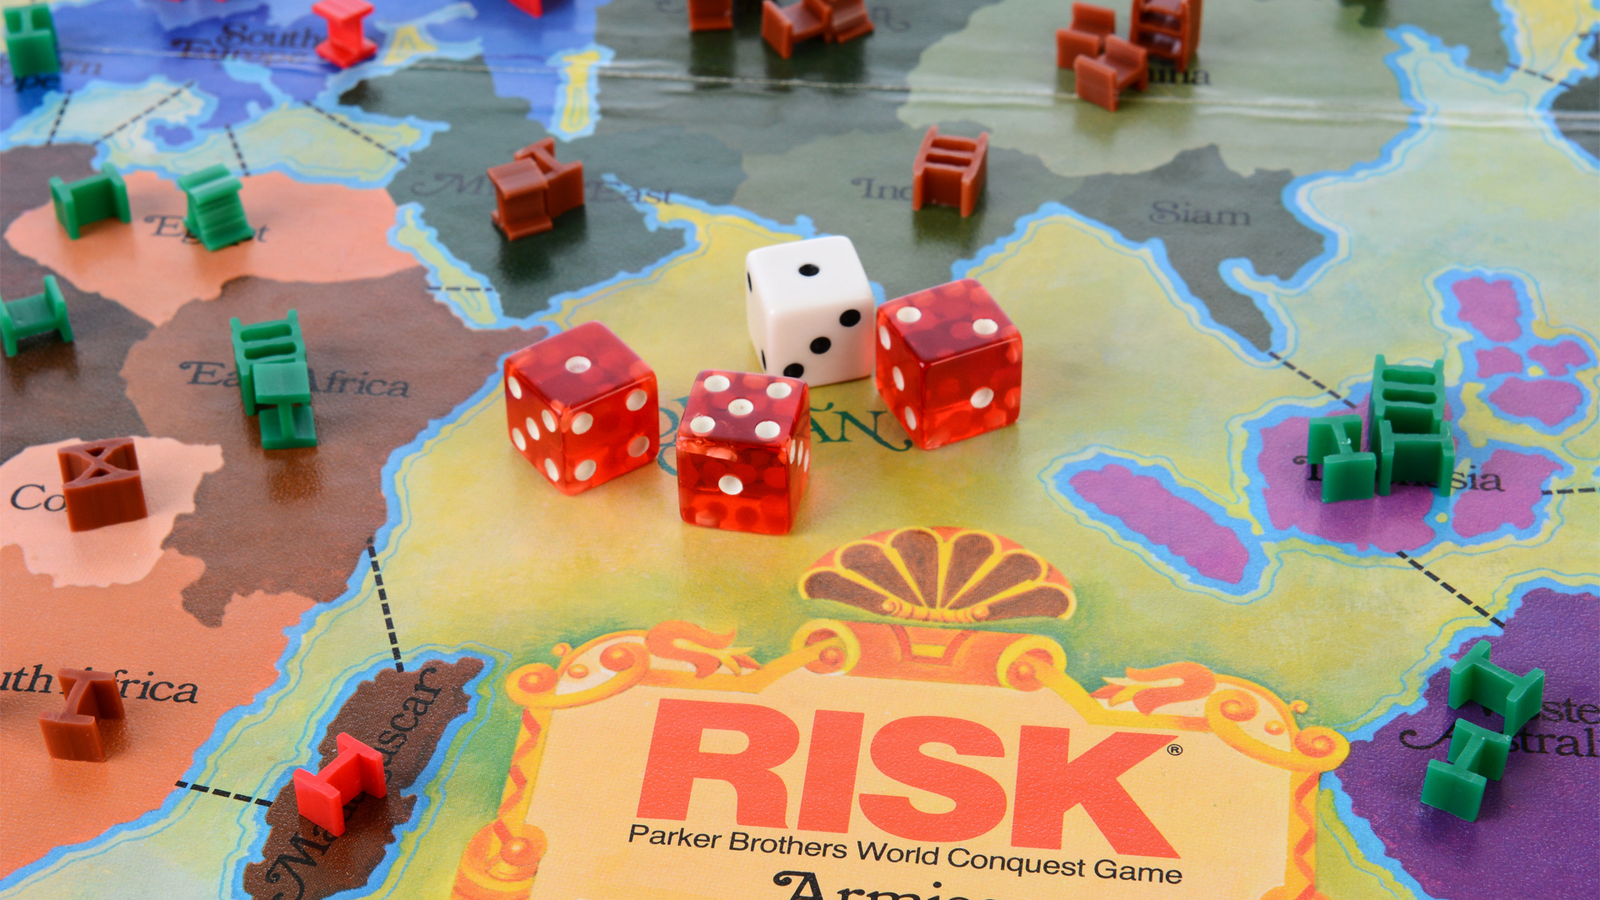  Winning Moves Warhammer Risk Strategy Board Game